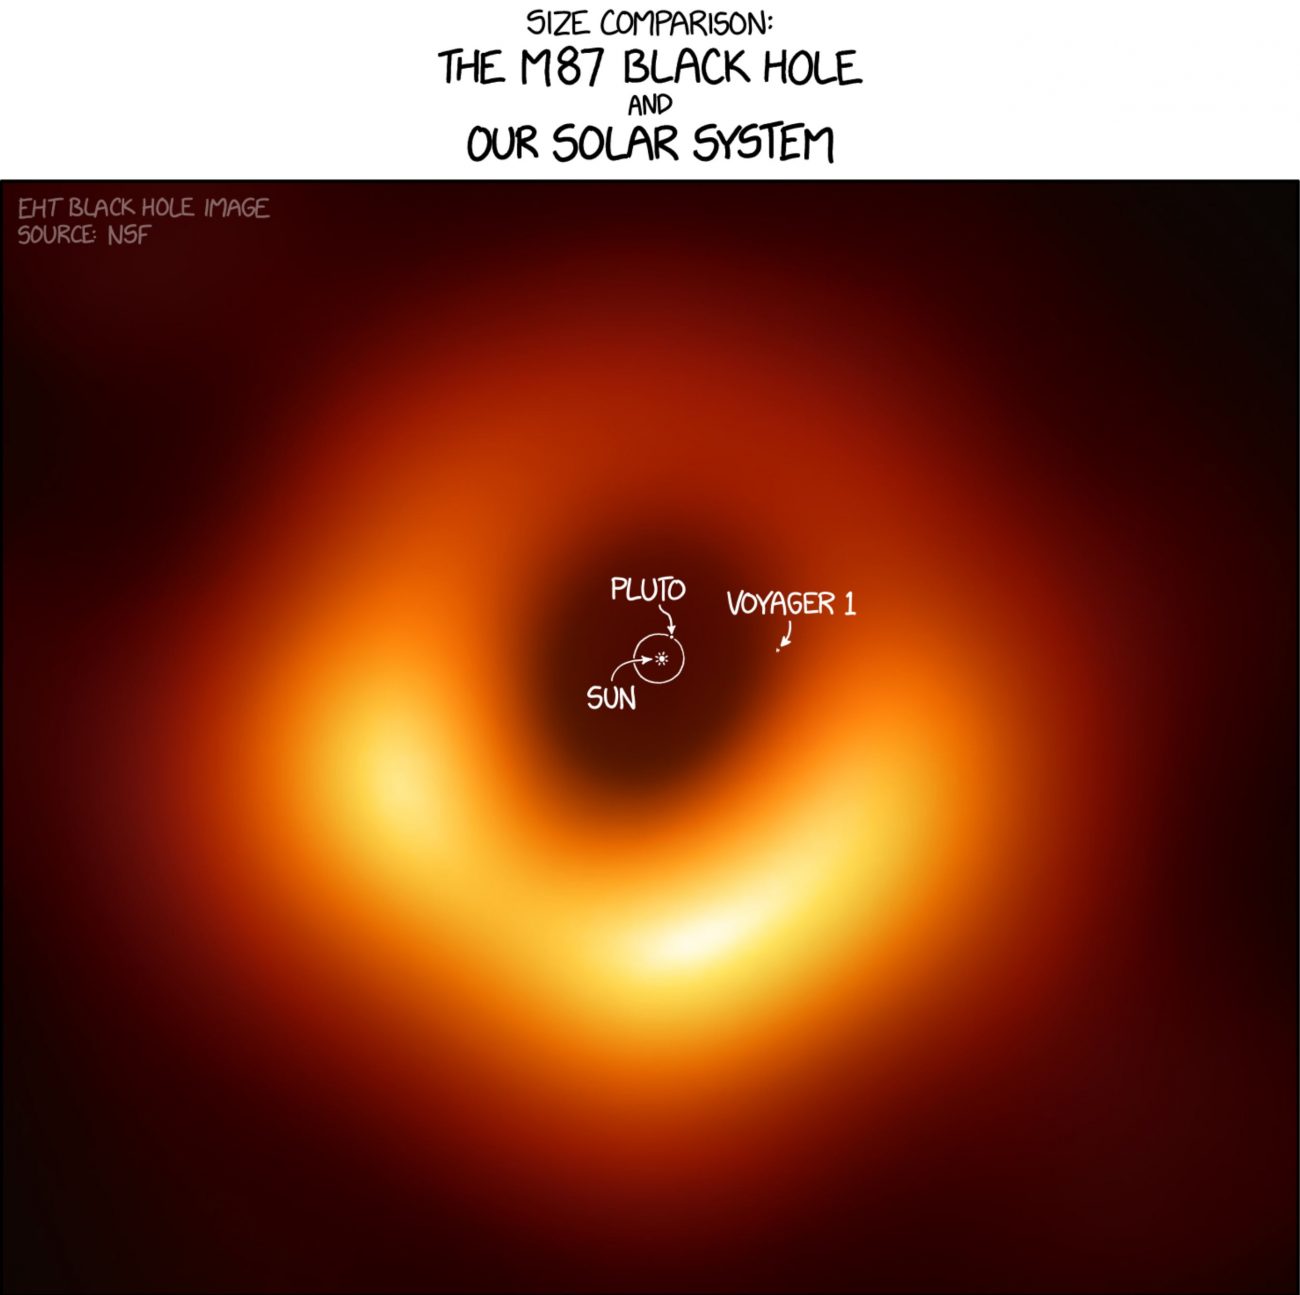 The first image of a Black Hole compared in size to our solar system. Image Credit: Randall Munroe / XKCD.